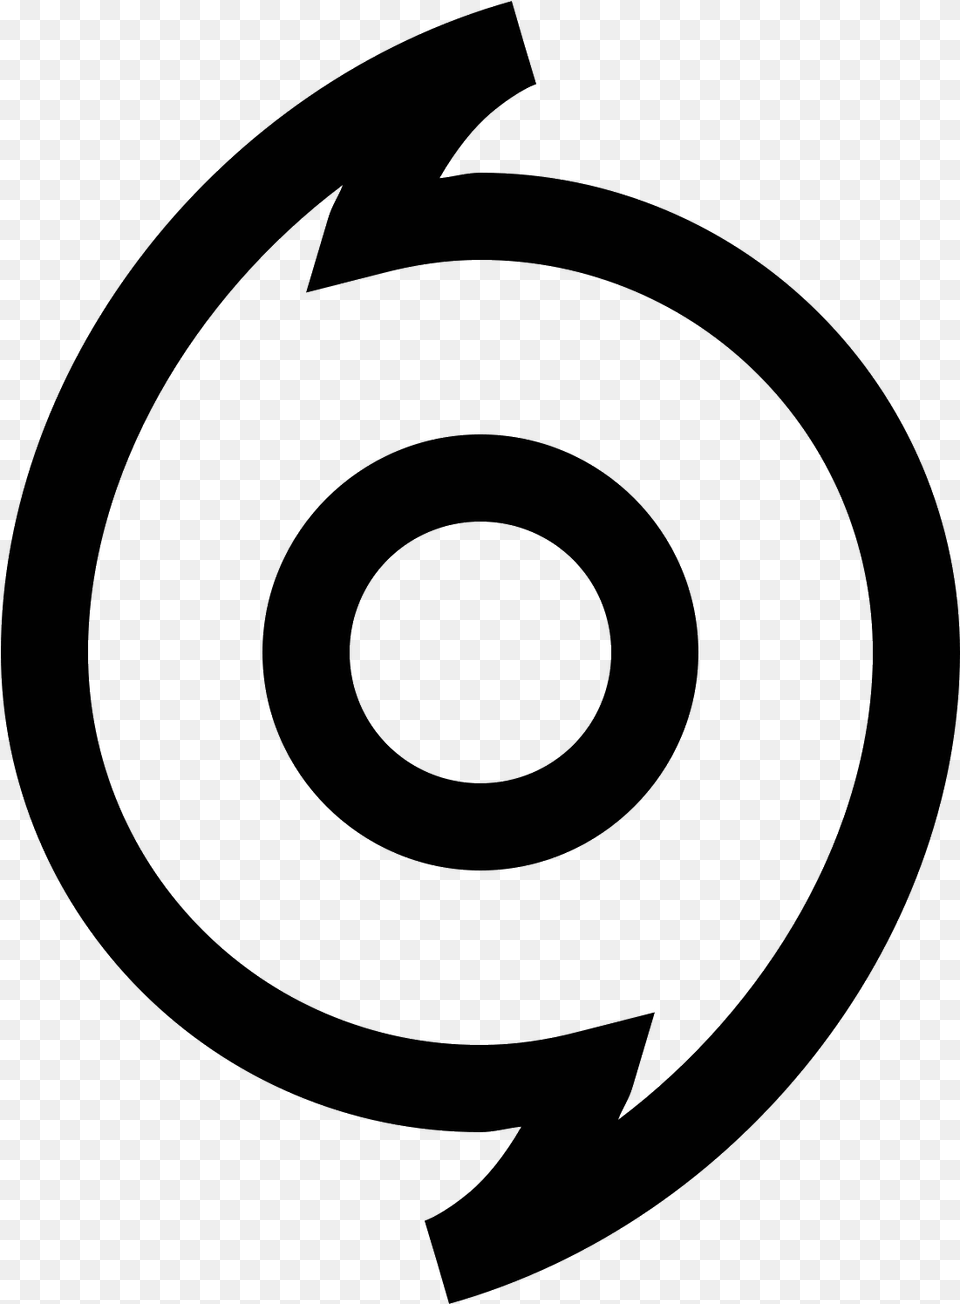 This Image Is A Logo Of A Circle That Has A Point On Origin White Logo, Gray Free Png Download